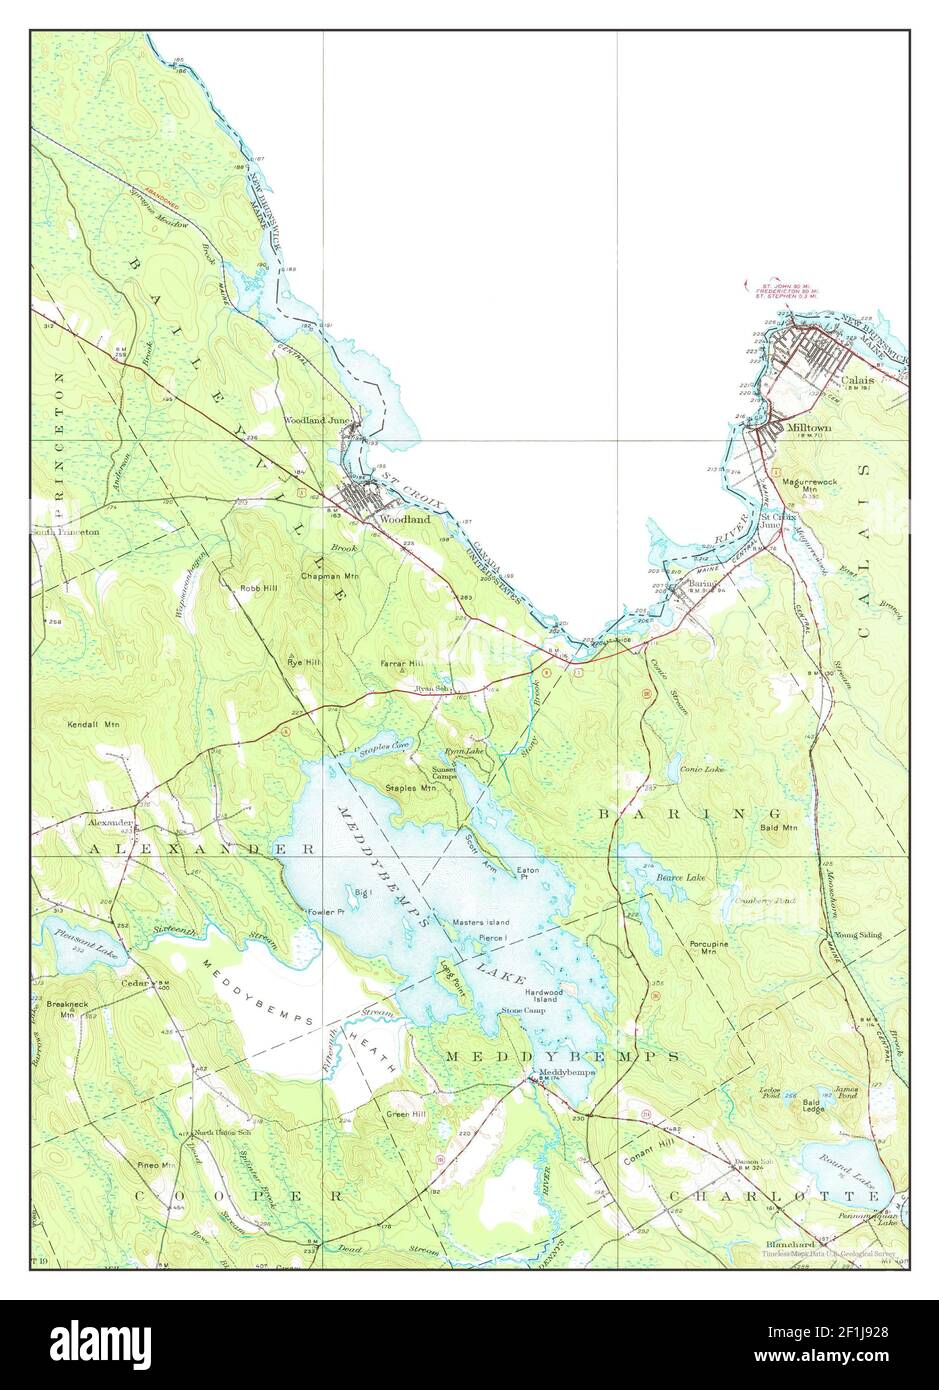 Calais, Maine, map 1929, 1:62500, United States of America by Timeless Maps, data U.S. Geological Survey Stock Photo